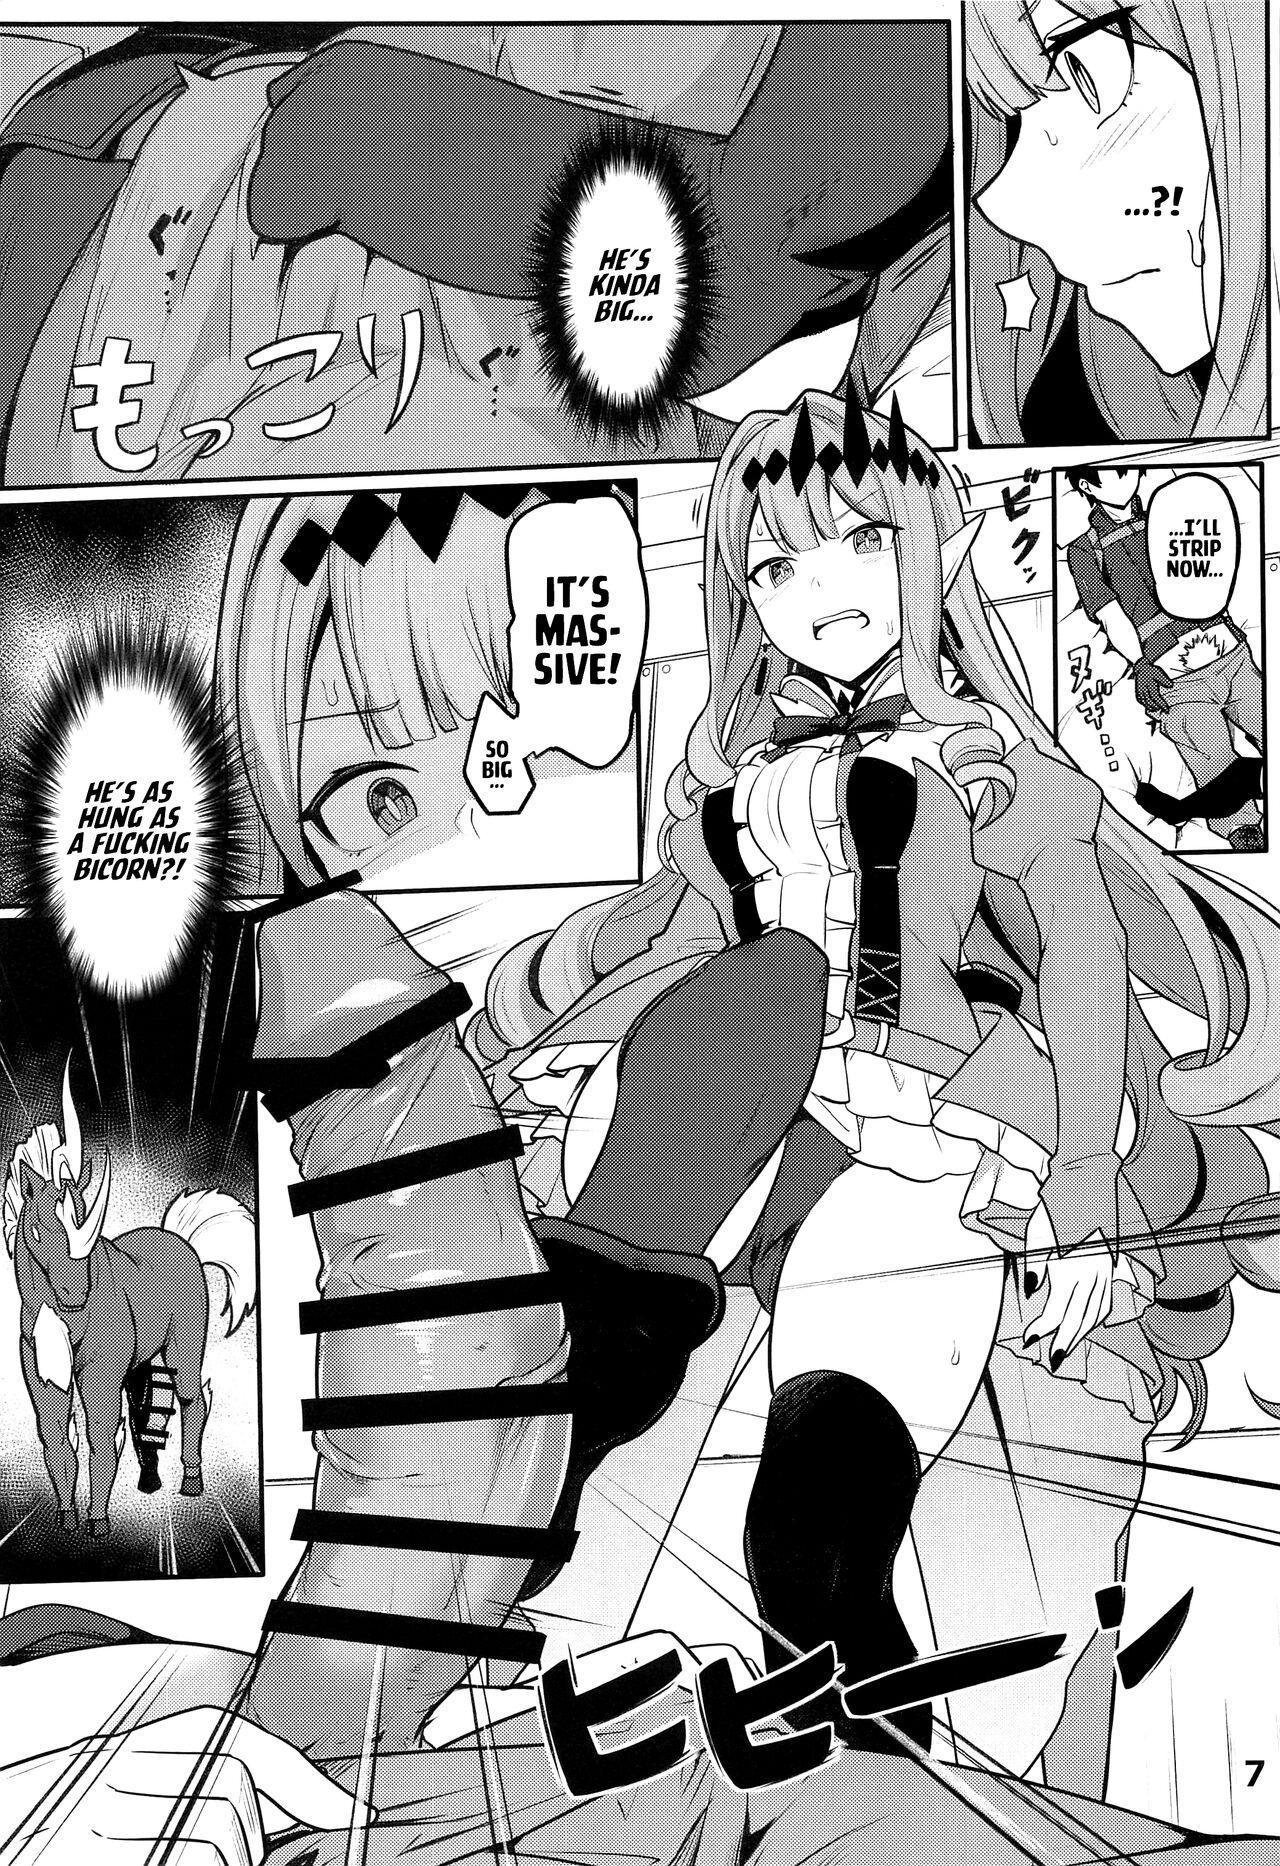 Pinoy Baobhan Sith to SEX Shinai to Derarenai Heya | Baobhan Sith and I Need to Have Sex or Else We Can't Leave This Room! - Fate grand order Women Sucking - Page 8